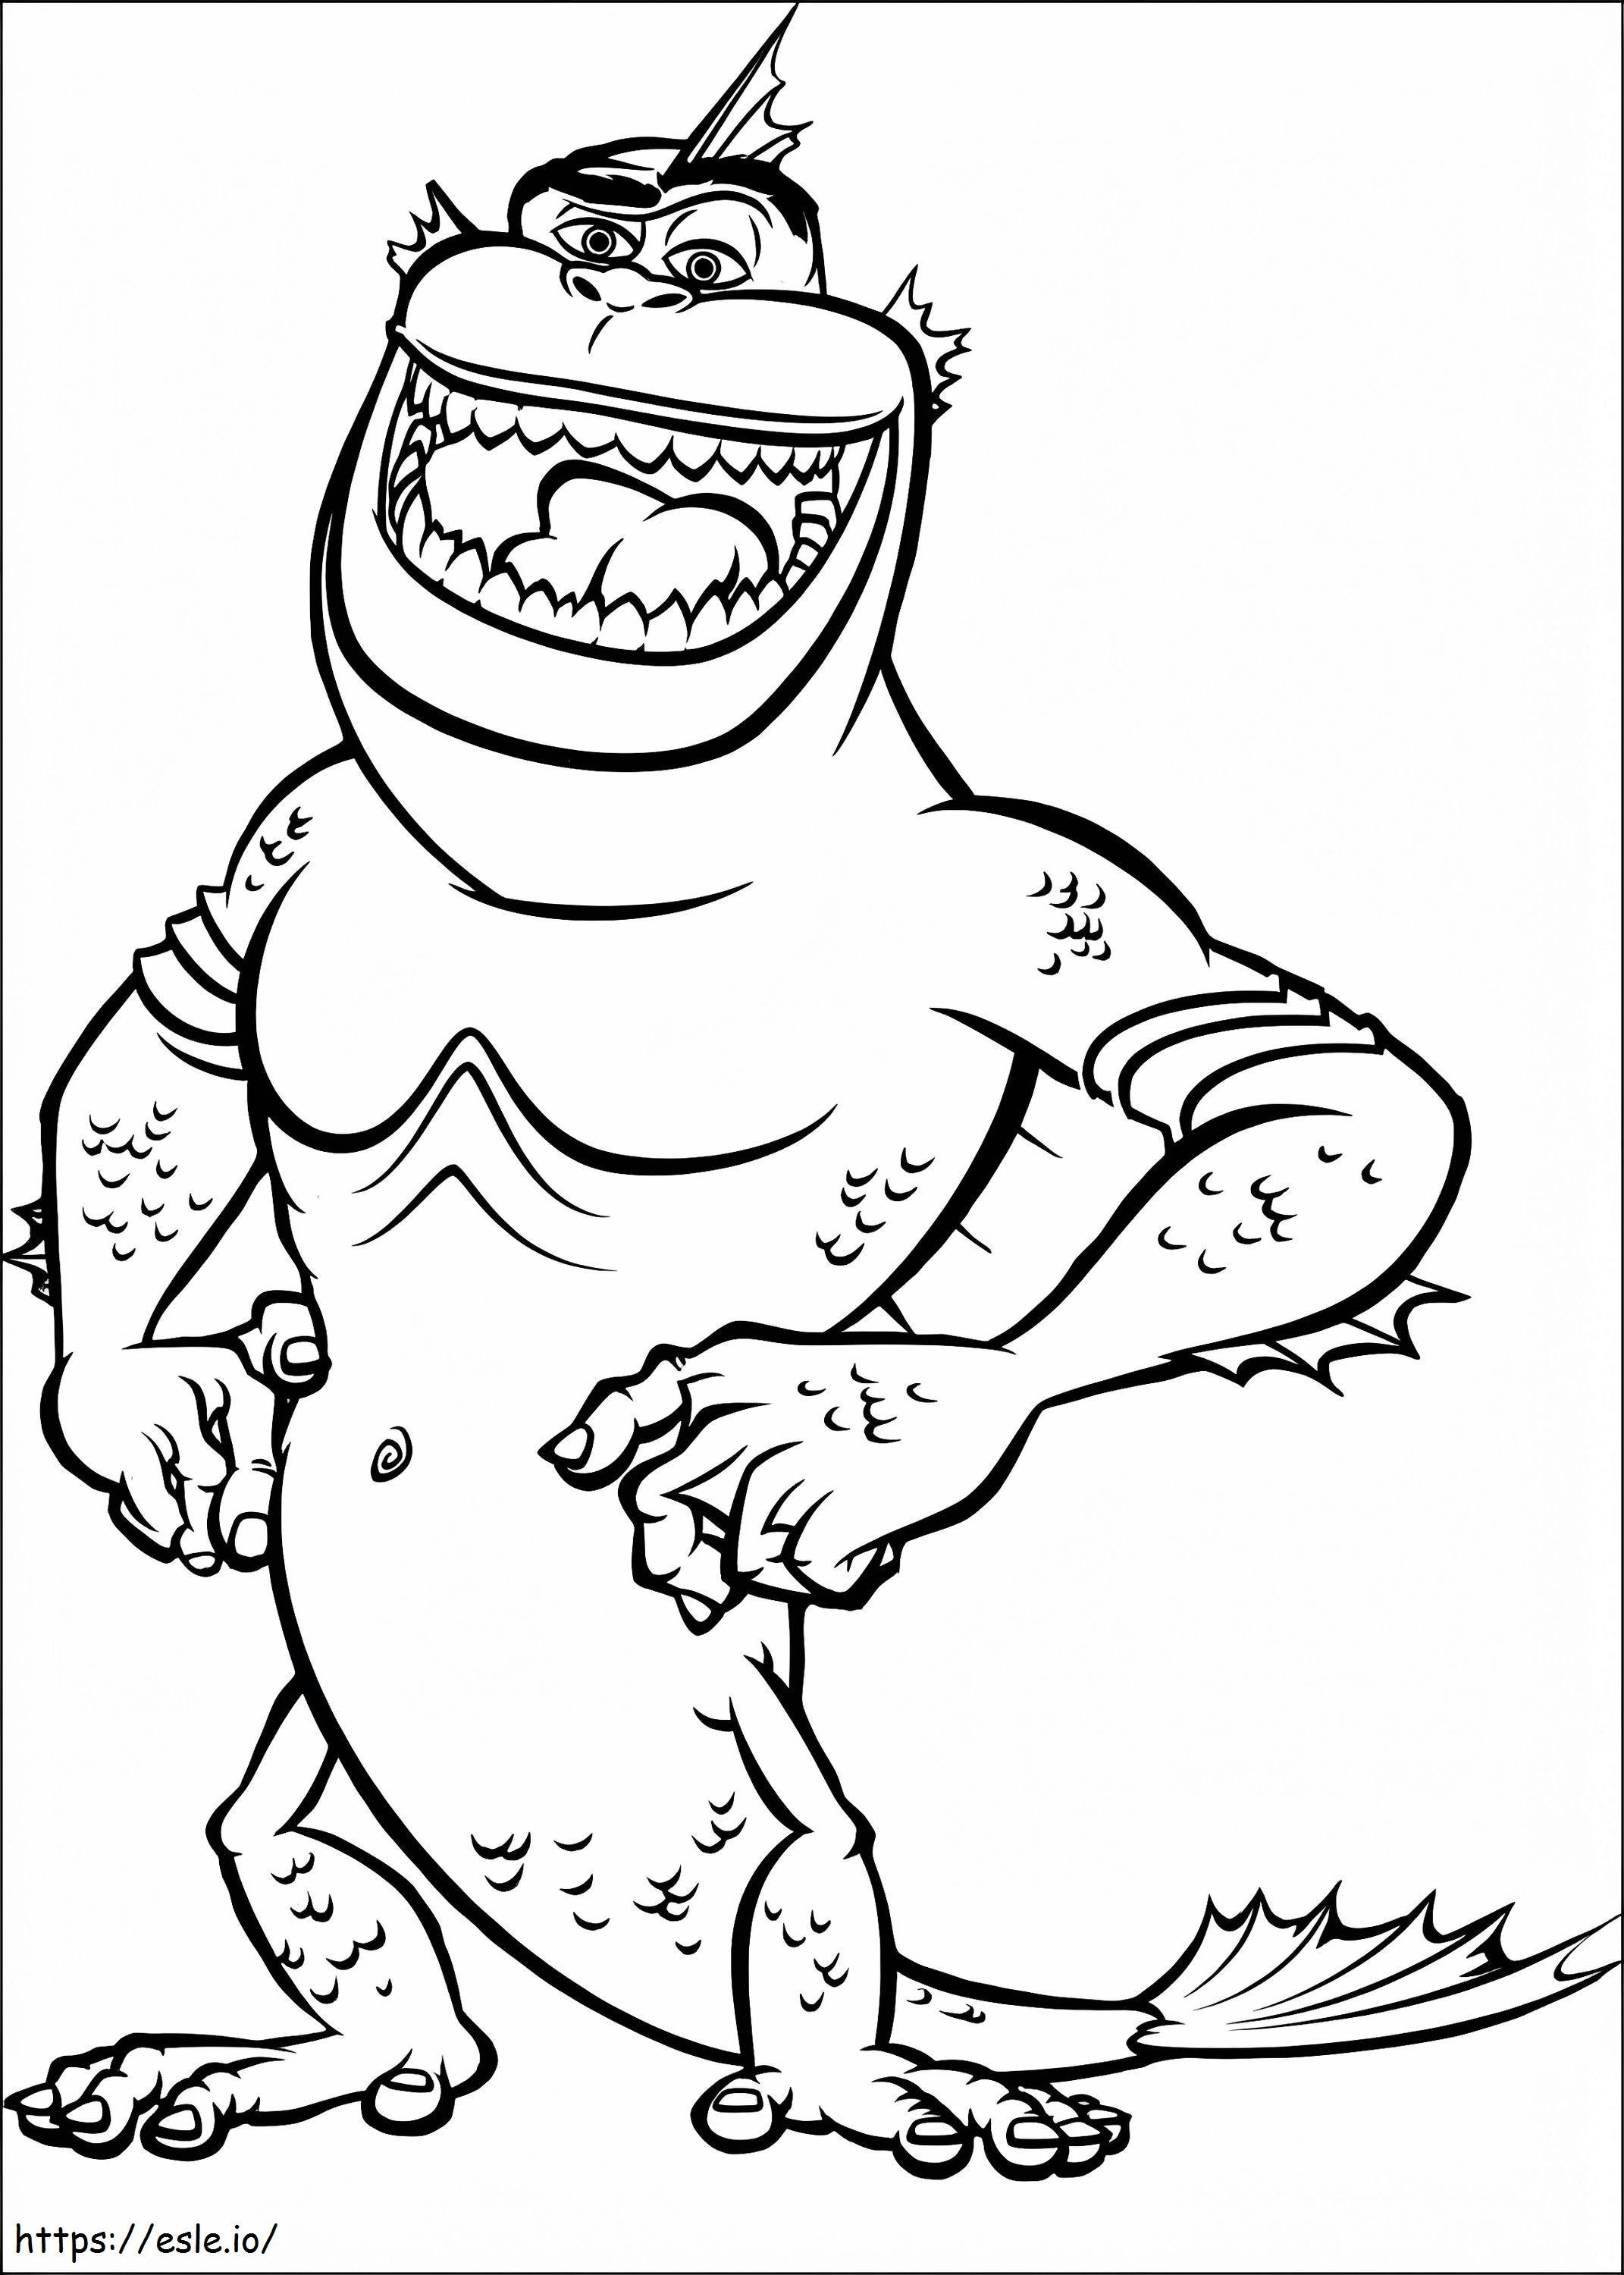 The Missing Link From Monsters Vs Aliens coloring page